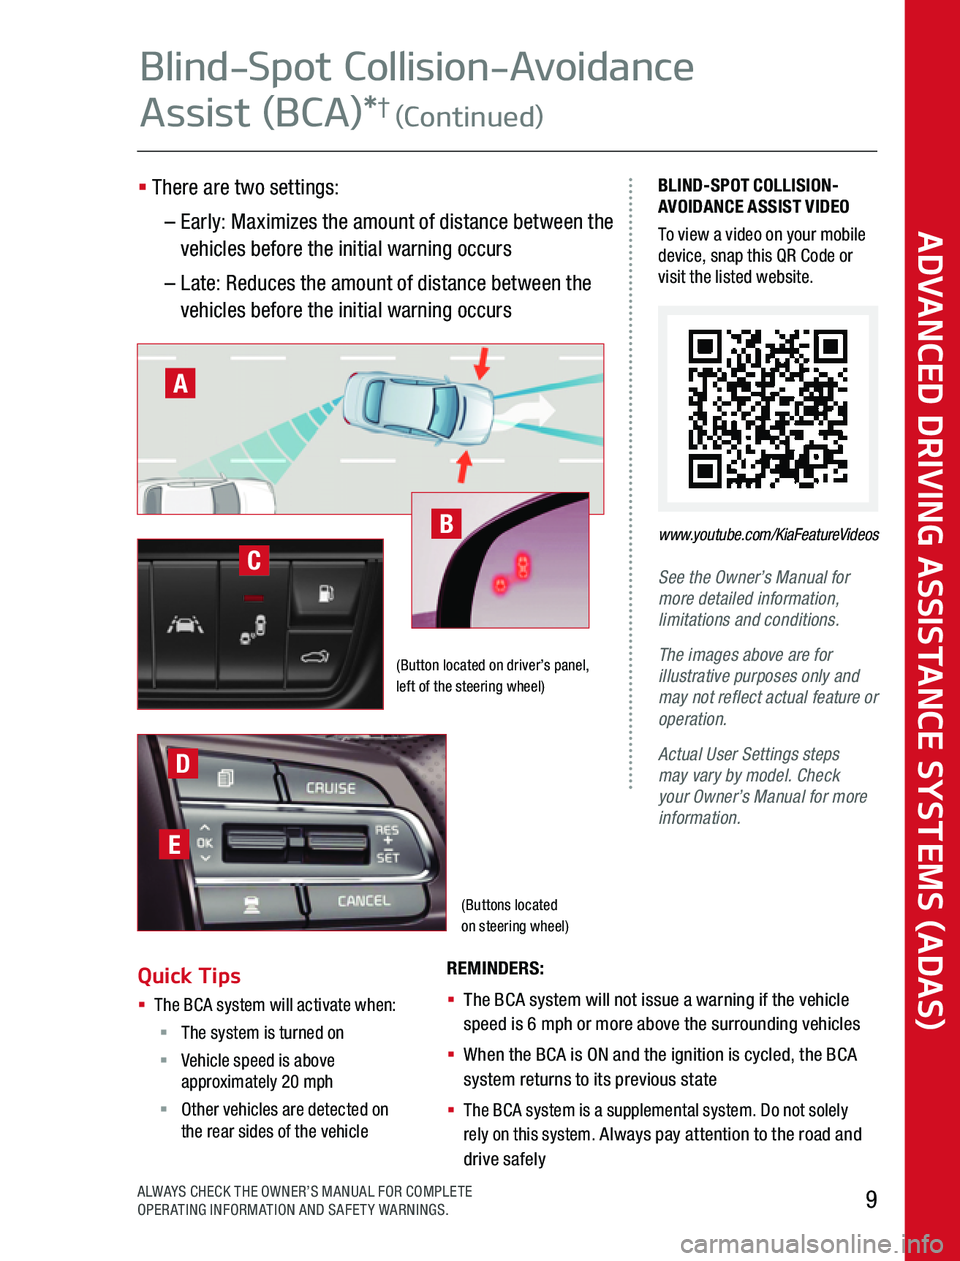 KIA NIRO 2020  Advanced Driving Assistance System (Buttons located  on steering wheel)
BLIND-SPOT COLLISION-AVOIDANCE ASSIST VIDEOTo view a video on your mobile device, snap this QR Code or visit the listed website  
See the Owner’s Manual for more